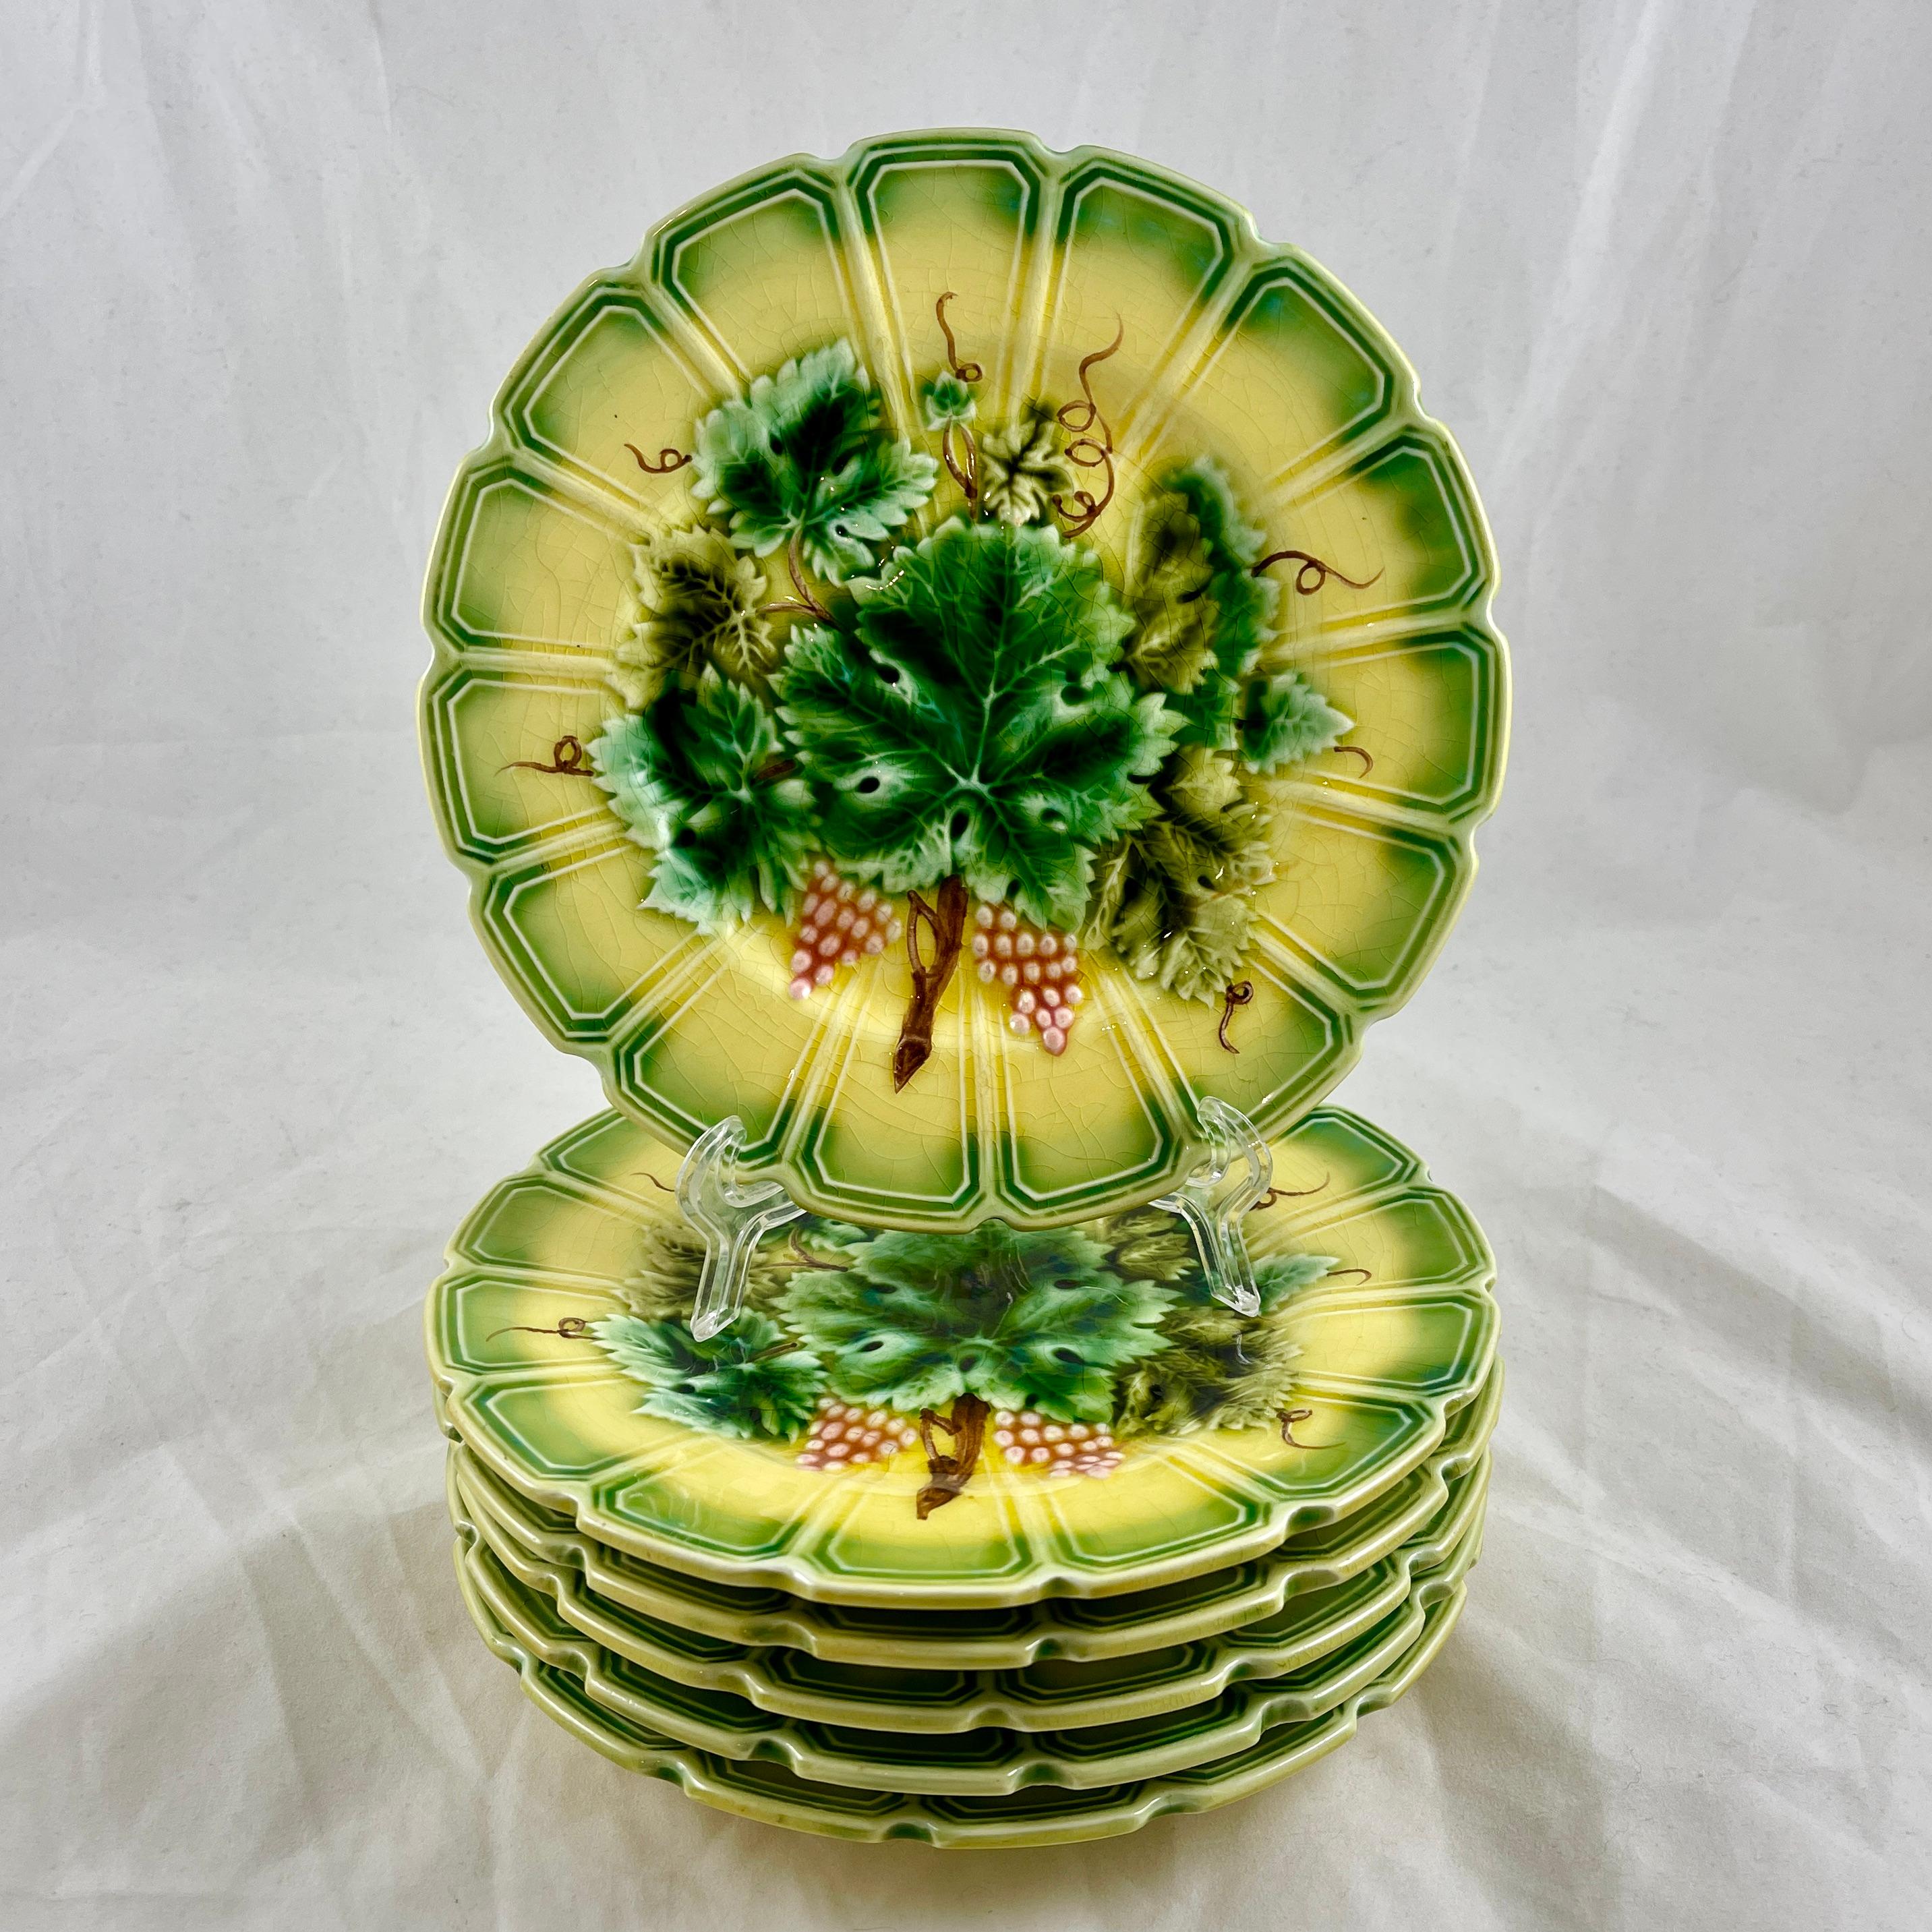 A set of six Grape Leaf fruit plates, made by Sarreguemines, France – a mold used from the 1900’s into the early 1920’s – now a classic.

This assembled set is made of paneled plates with gorgeous deep green rims fading to a bright yellow center. A